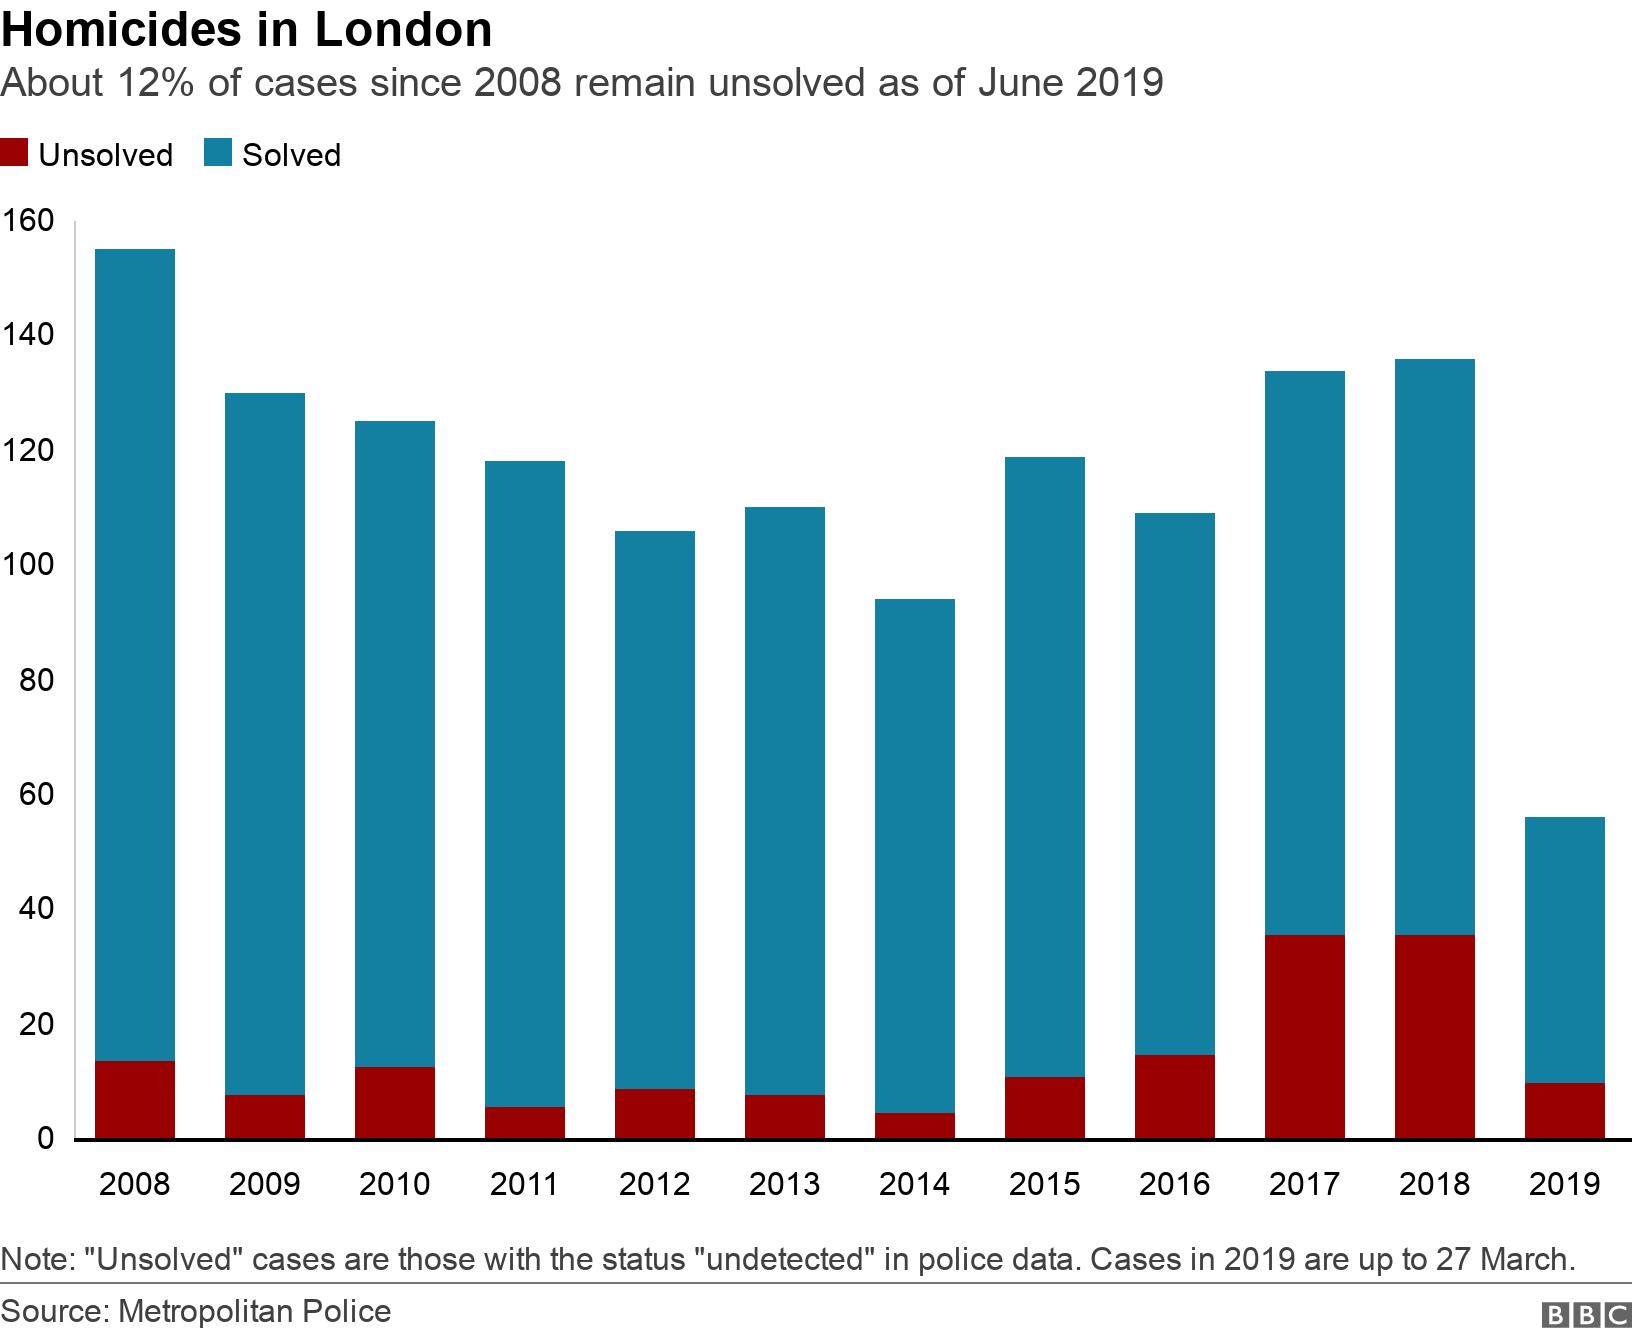 Homicides in London. About 12% of cases since 2008 remain unsolved as of June 2019.  Note: "Unsolved" cases are those with the status "undetected" in police data. Cases in 2019 are up to 27 March..